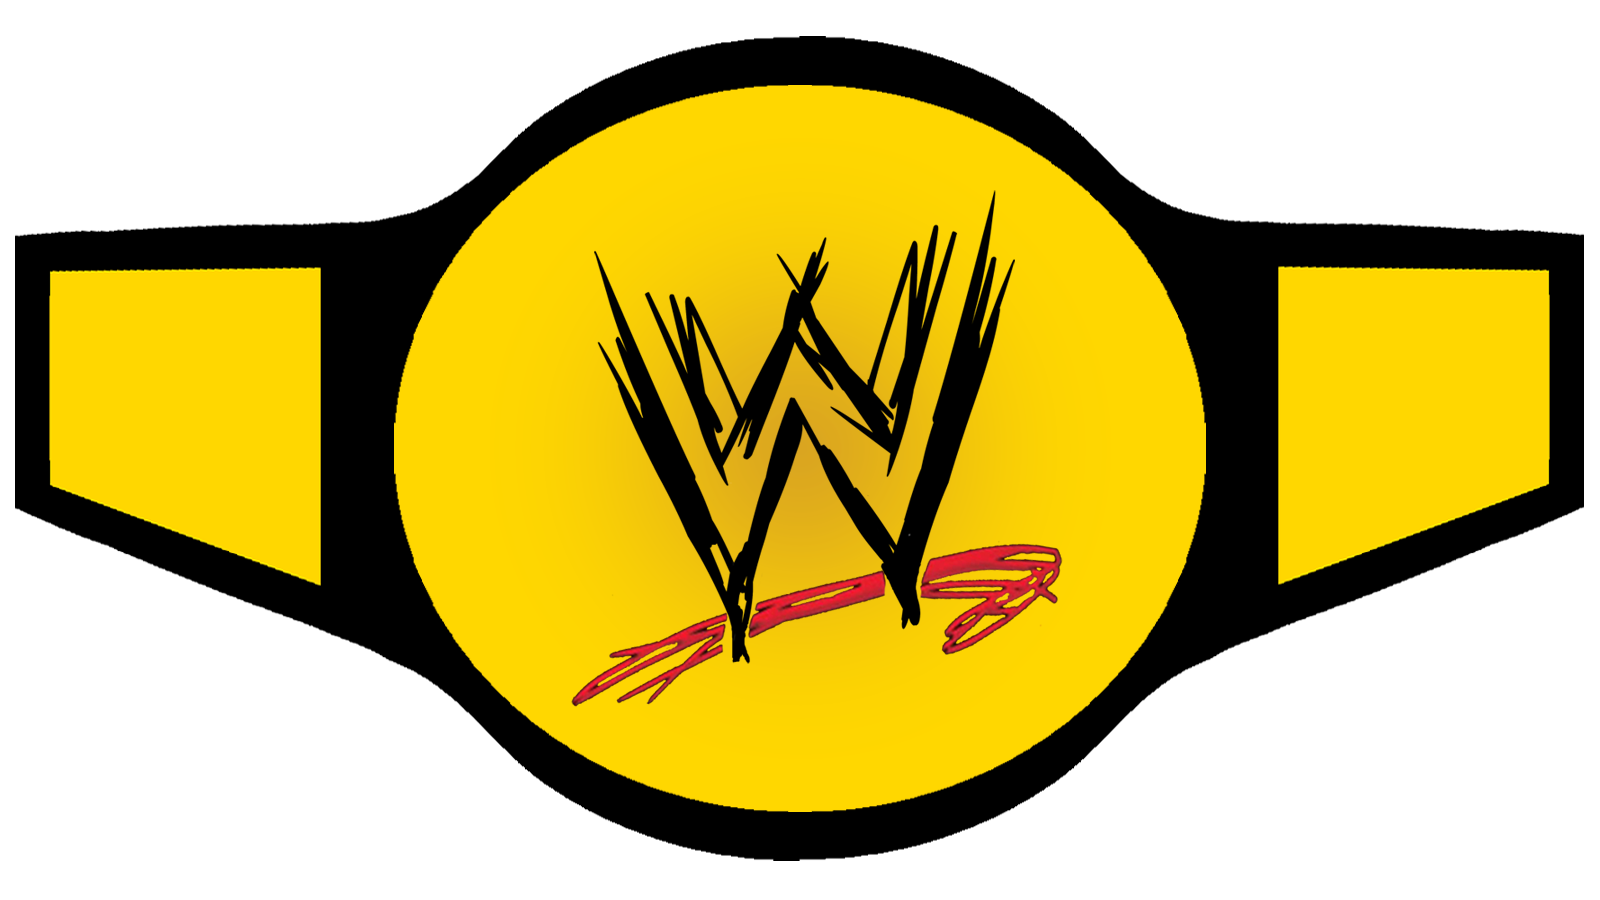 Championship Of Wwe Images - ClipArt Best